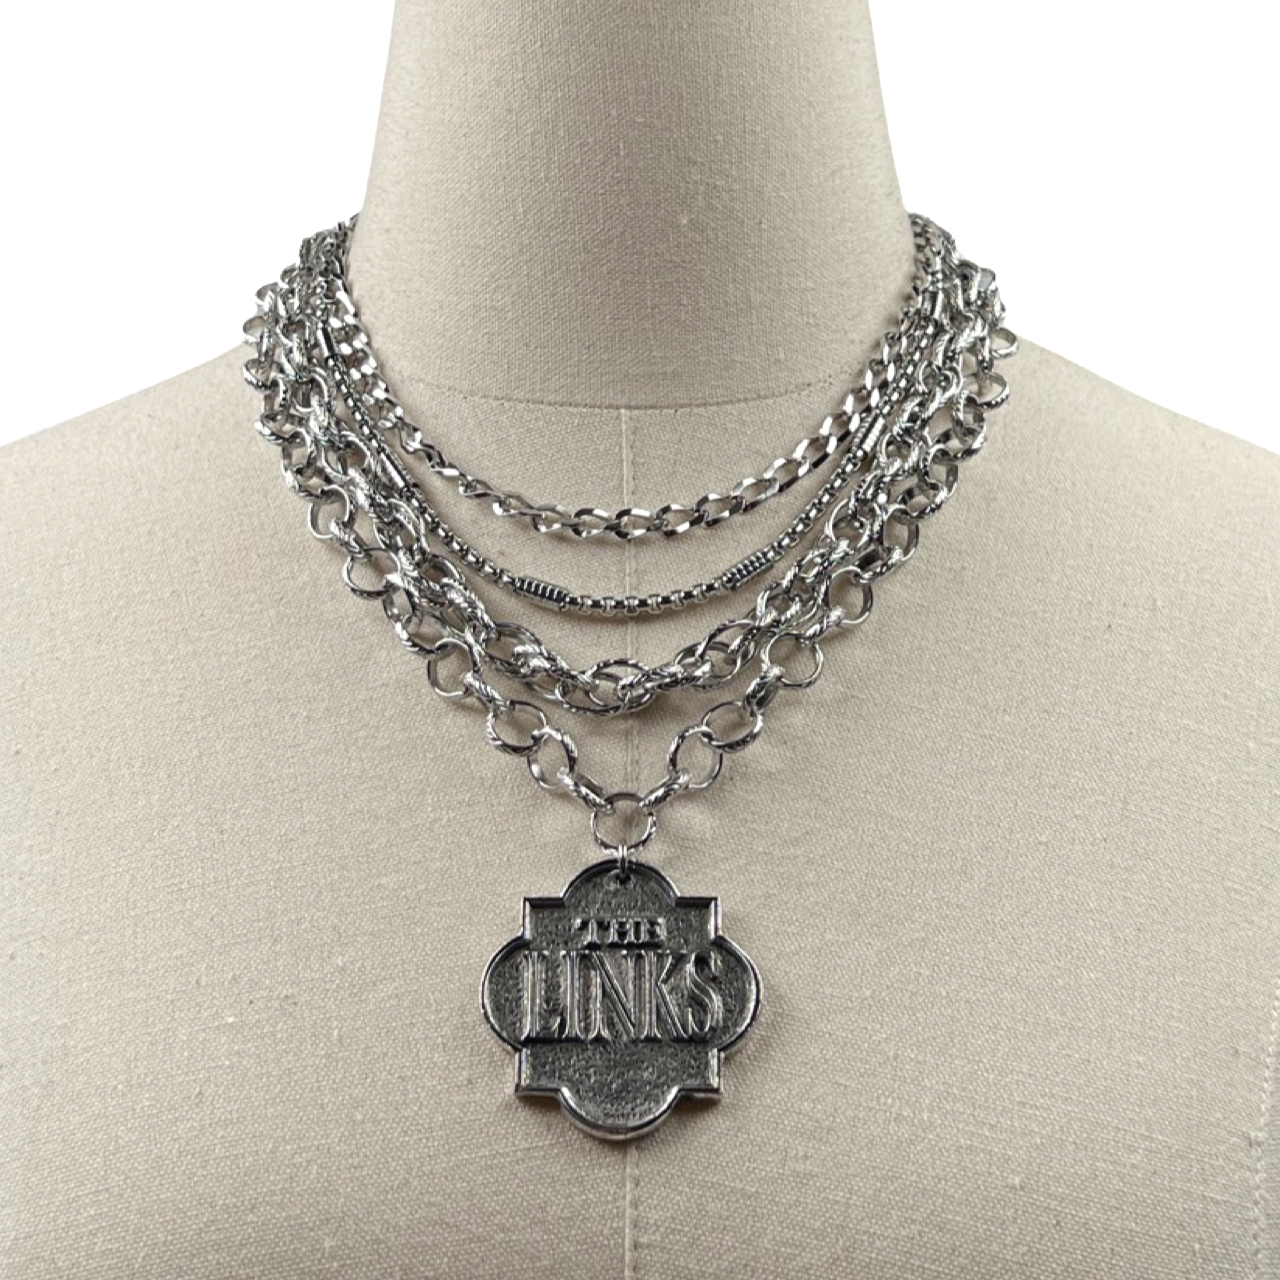 Links Classic Beat Necklace LINKS Necklaces Cerese D, Inc. Shield Silver 